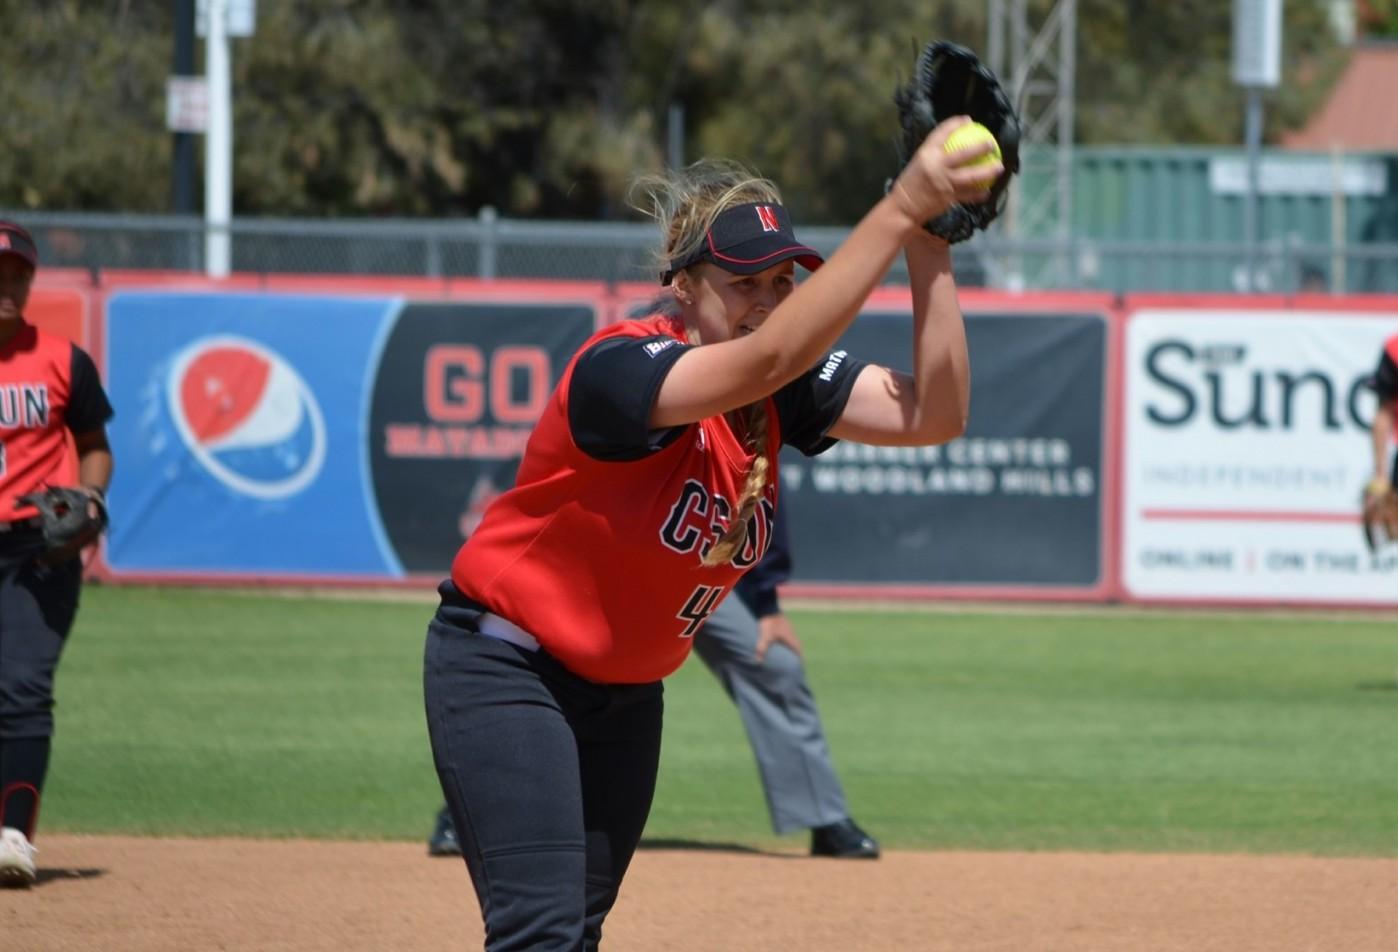 Freshman pitcher Taylor Troost, winds up for her next pitch. (Anthony Martinez/The Sundial)